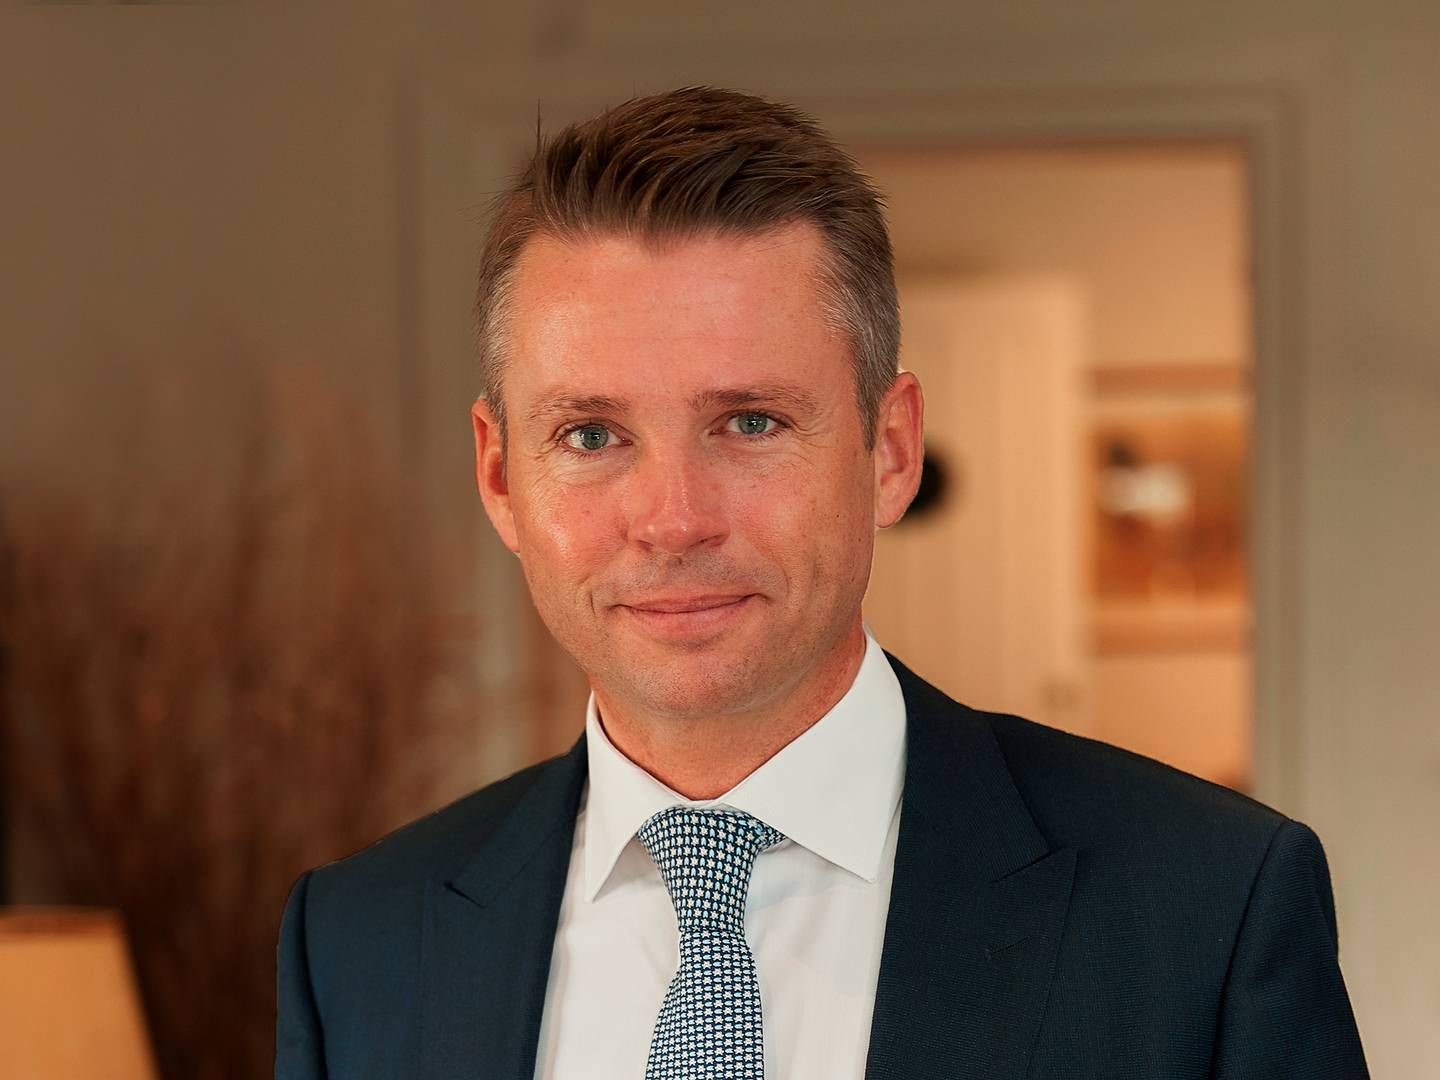 Anders Østergaard is CEO of oil supplier Monjasa, which he also owns. The Danish national lives in Dubai. | Foto: Monjasa